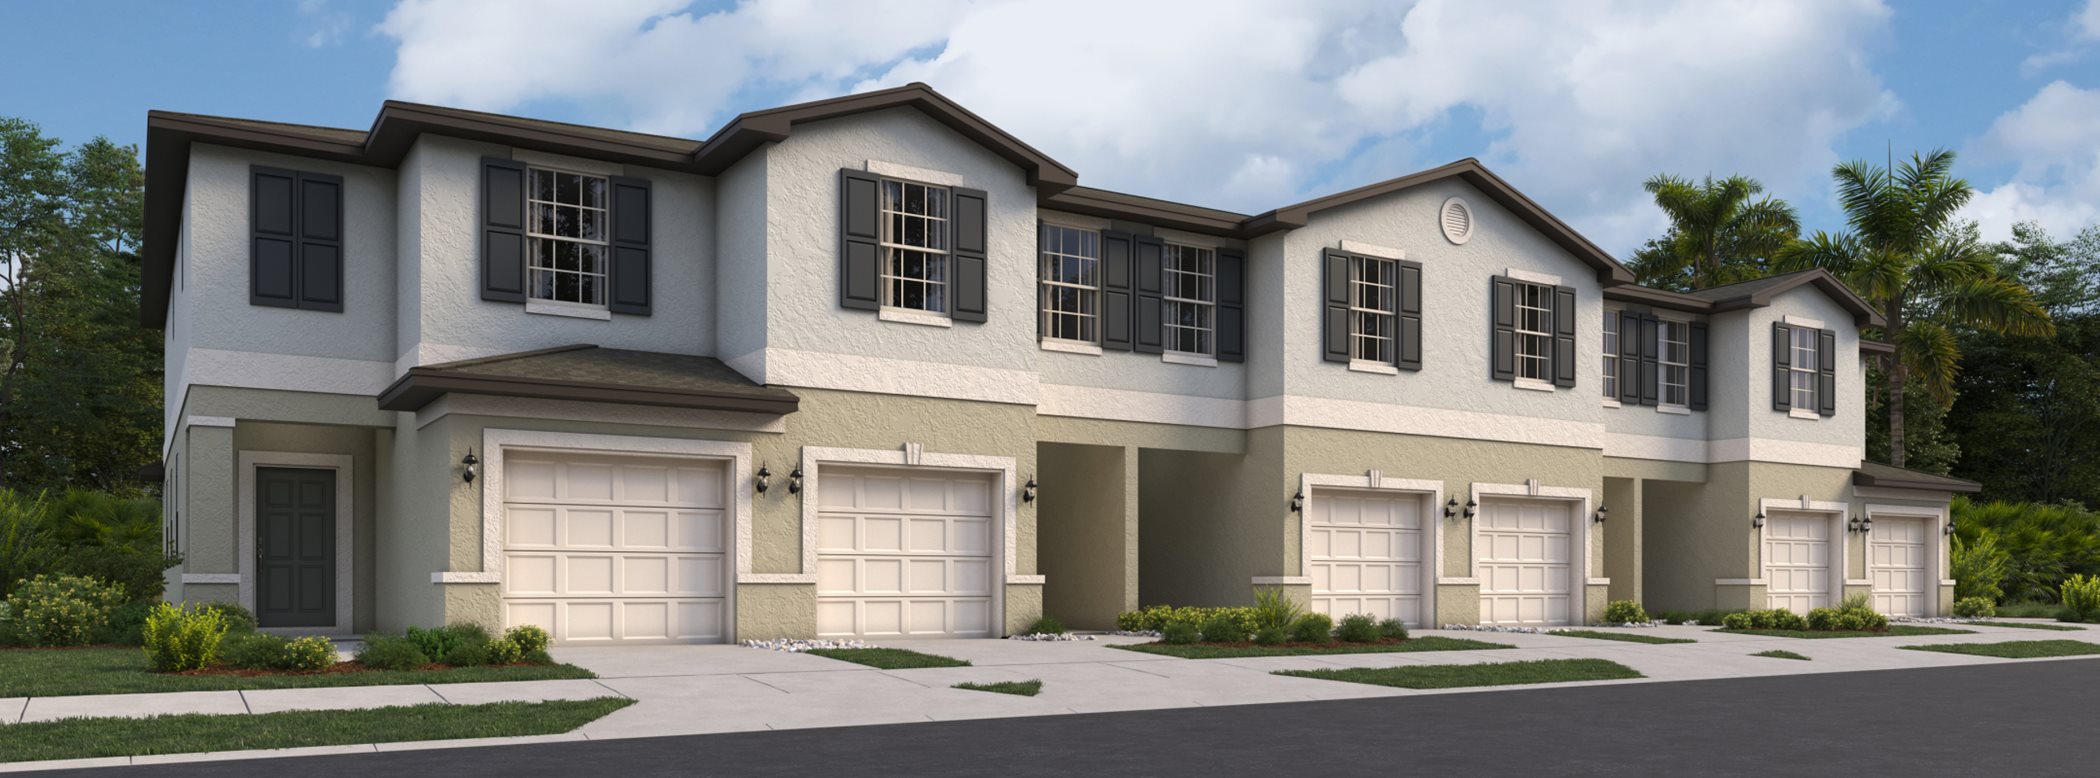 Angeline Townhomes streetscape